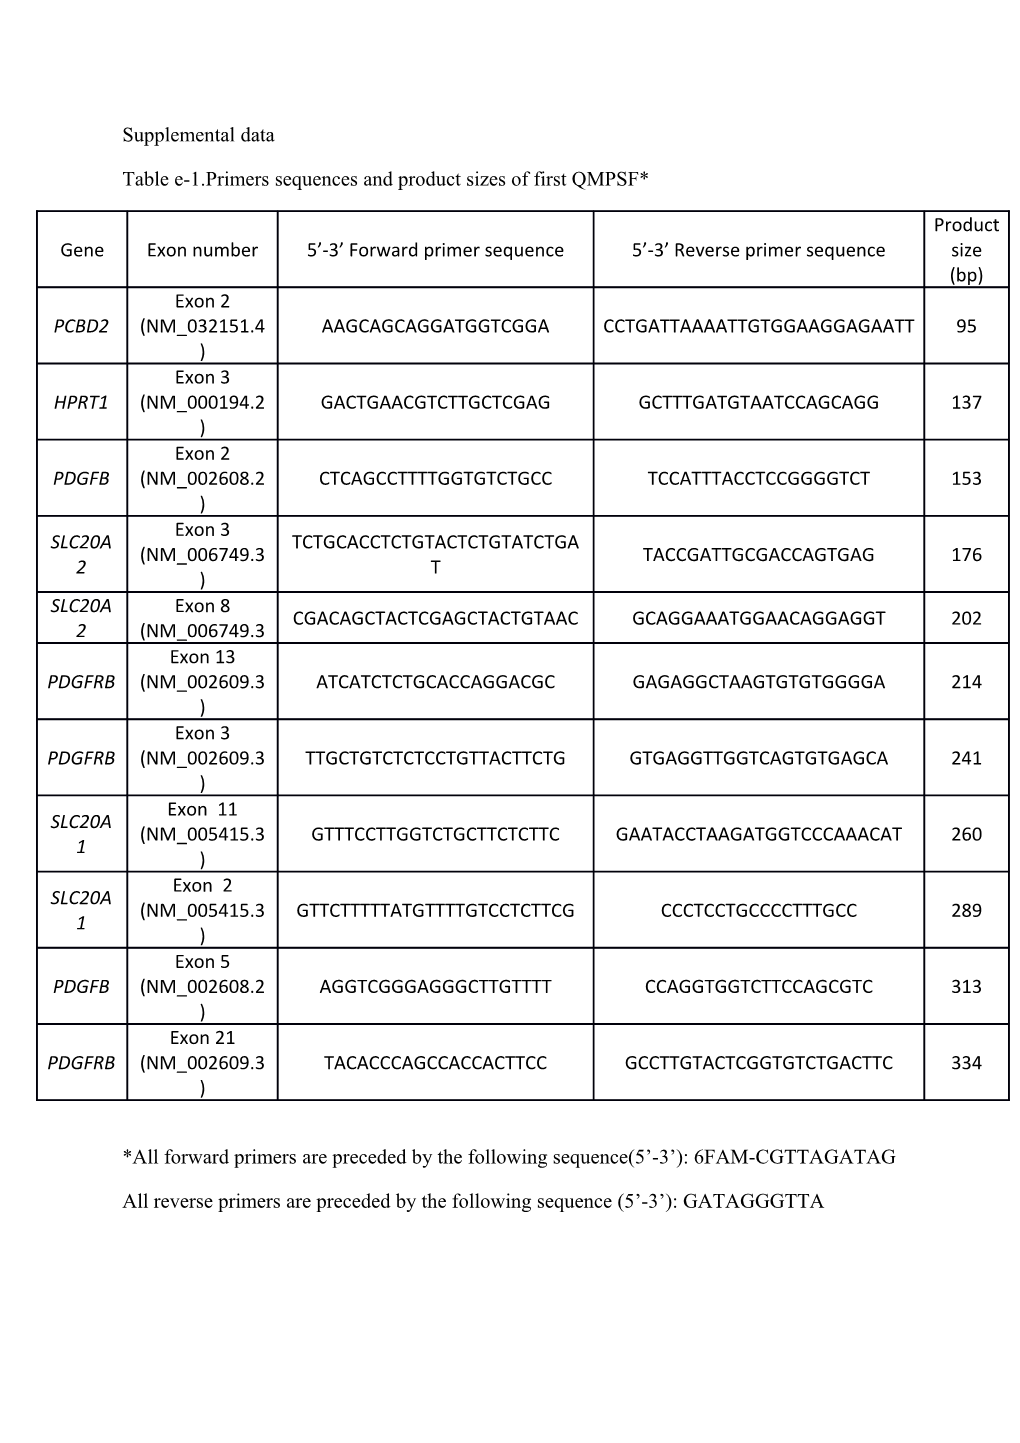 Table E-1.Primers Sequences and Product Sizes of First QMPSF*